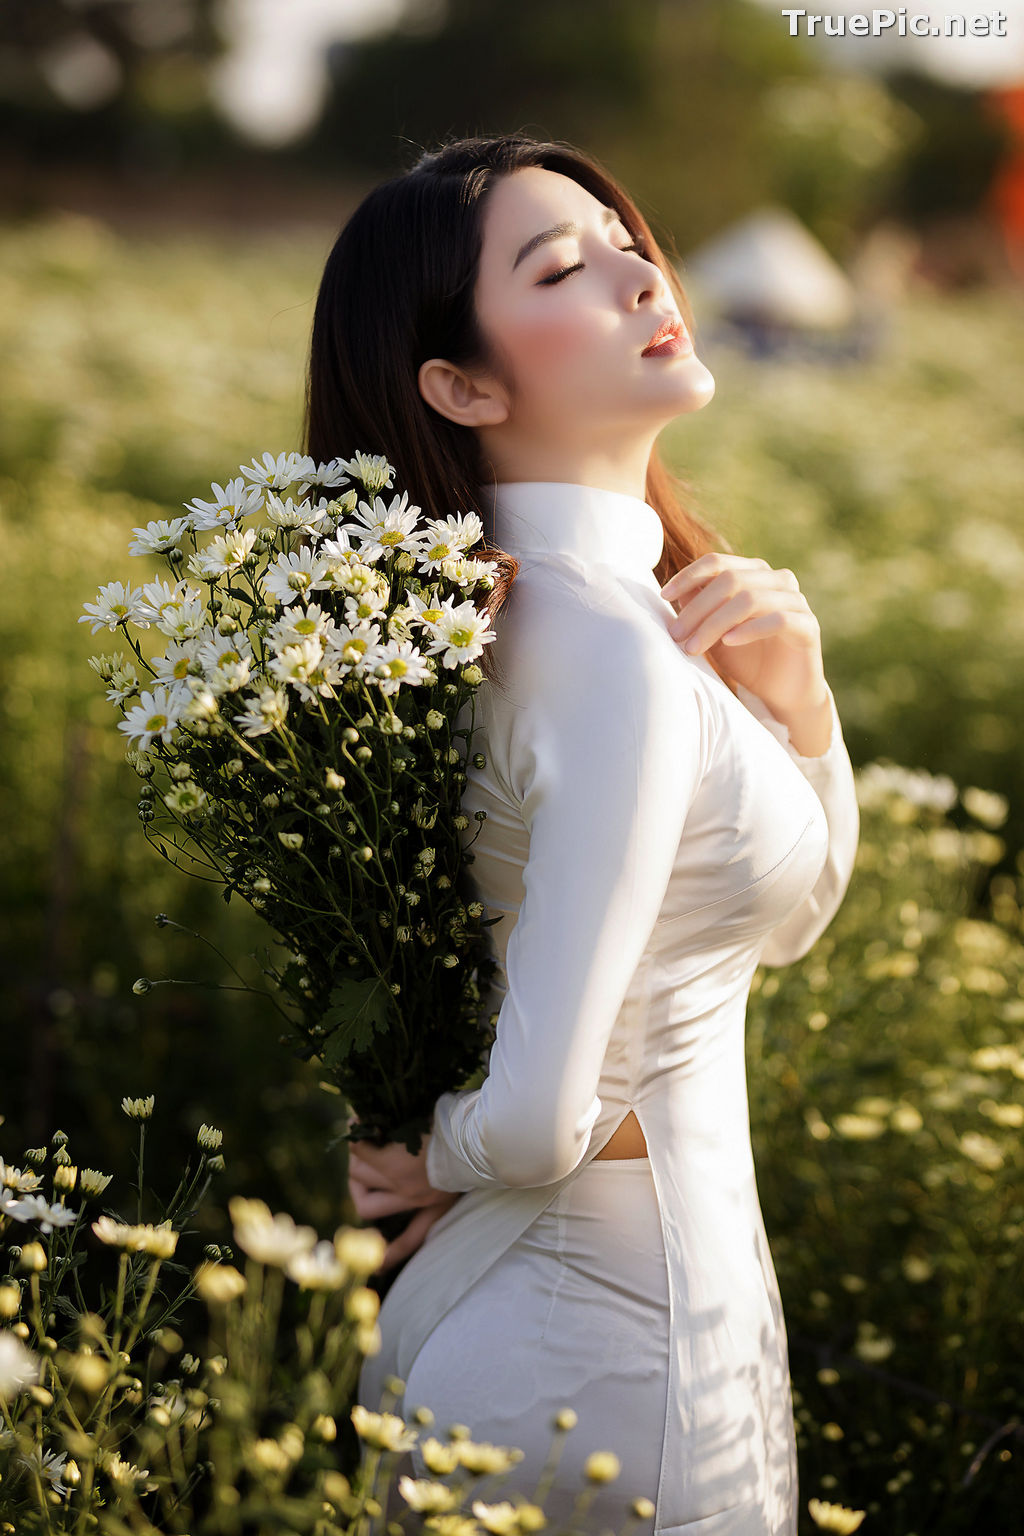 The Beauty Of Vietnamese Girls With Traditional Dress Ao Dai